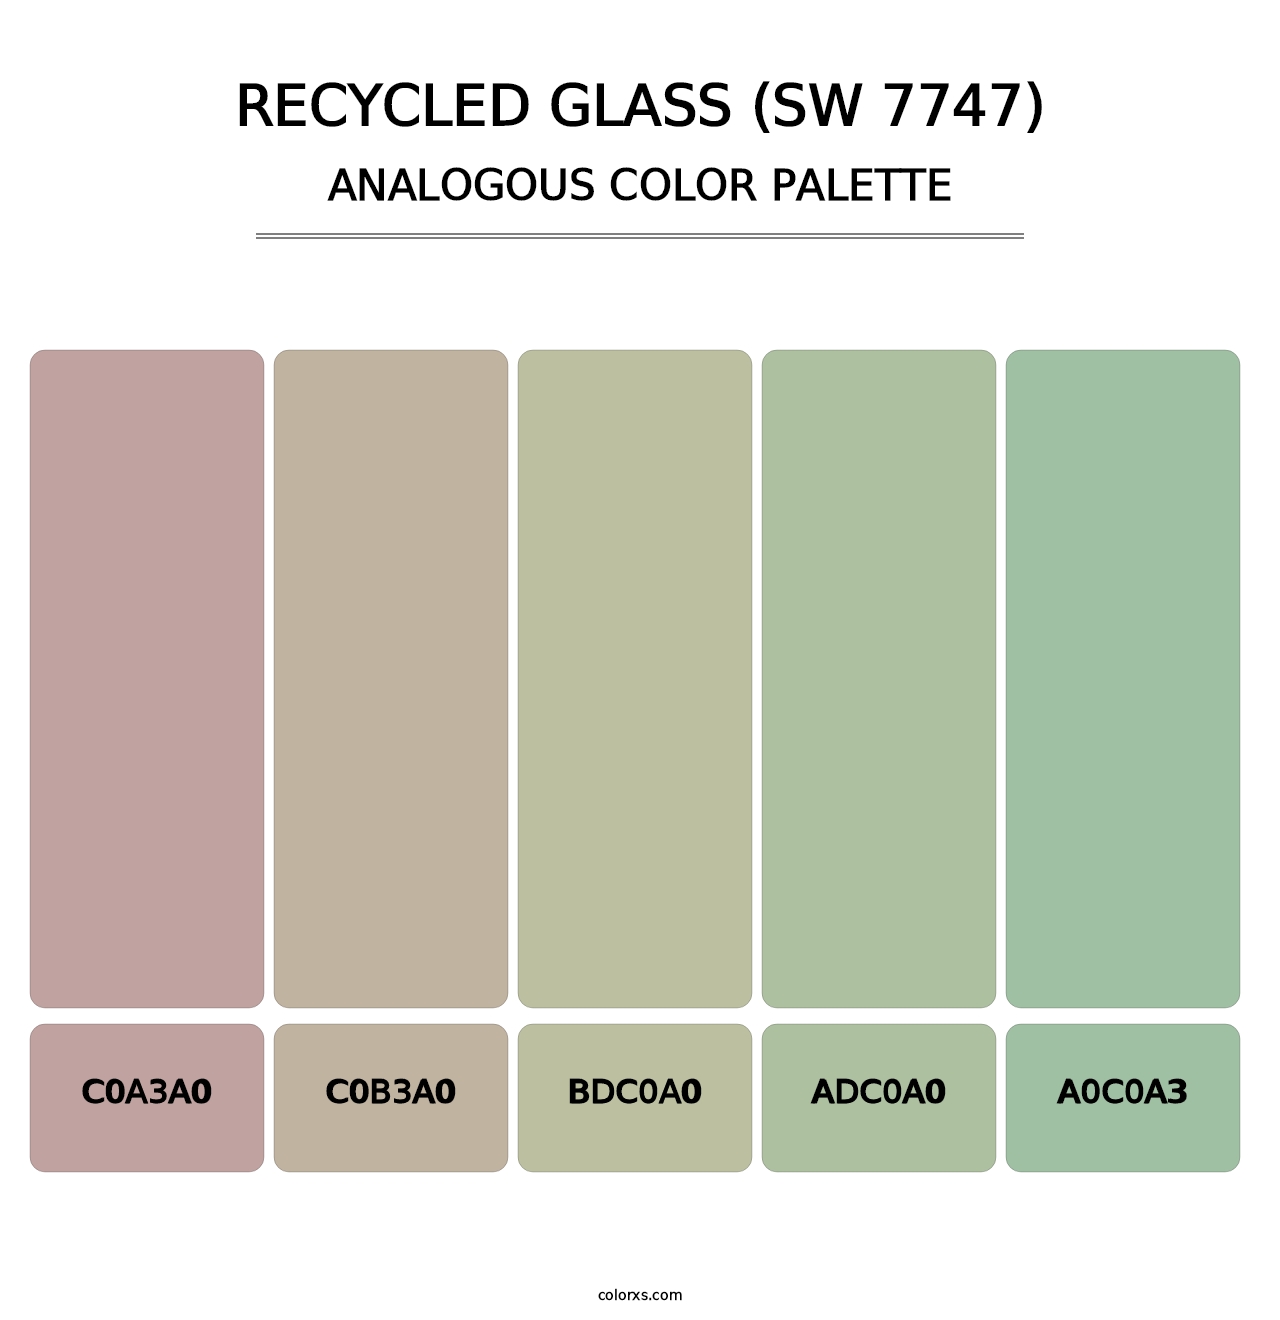 Recycled Glass (SW 7747) - Analogous Color Palette